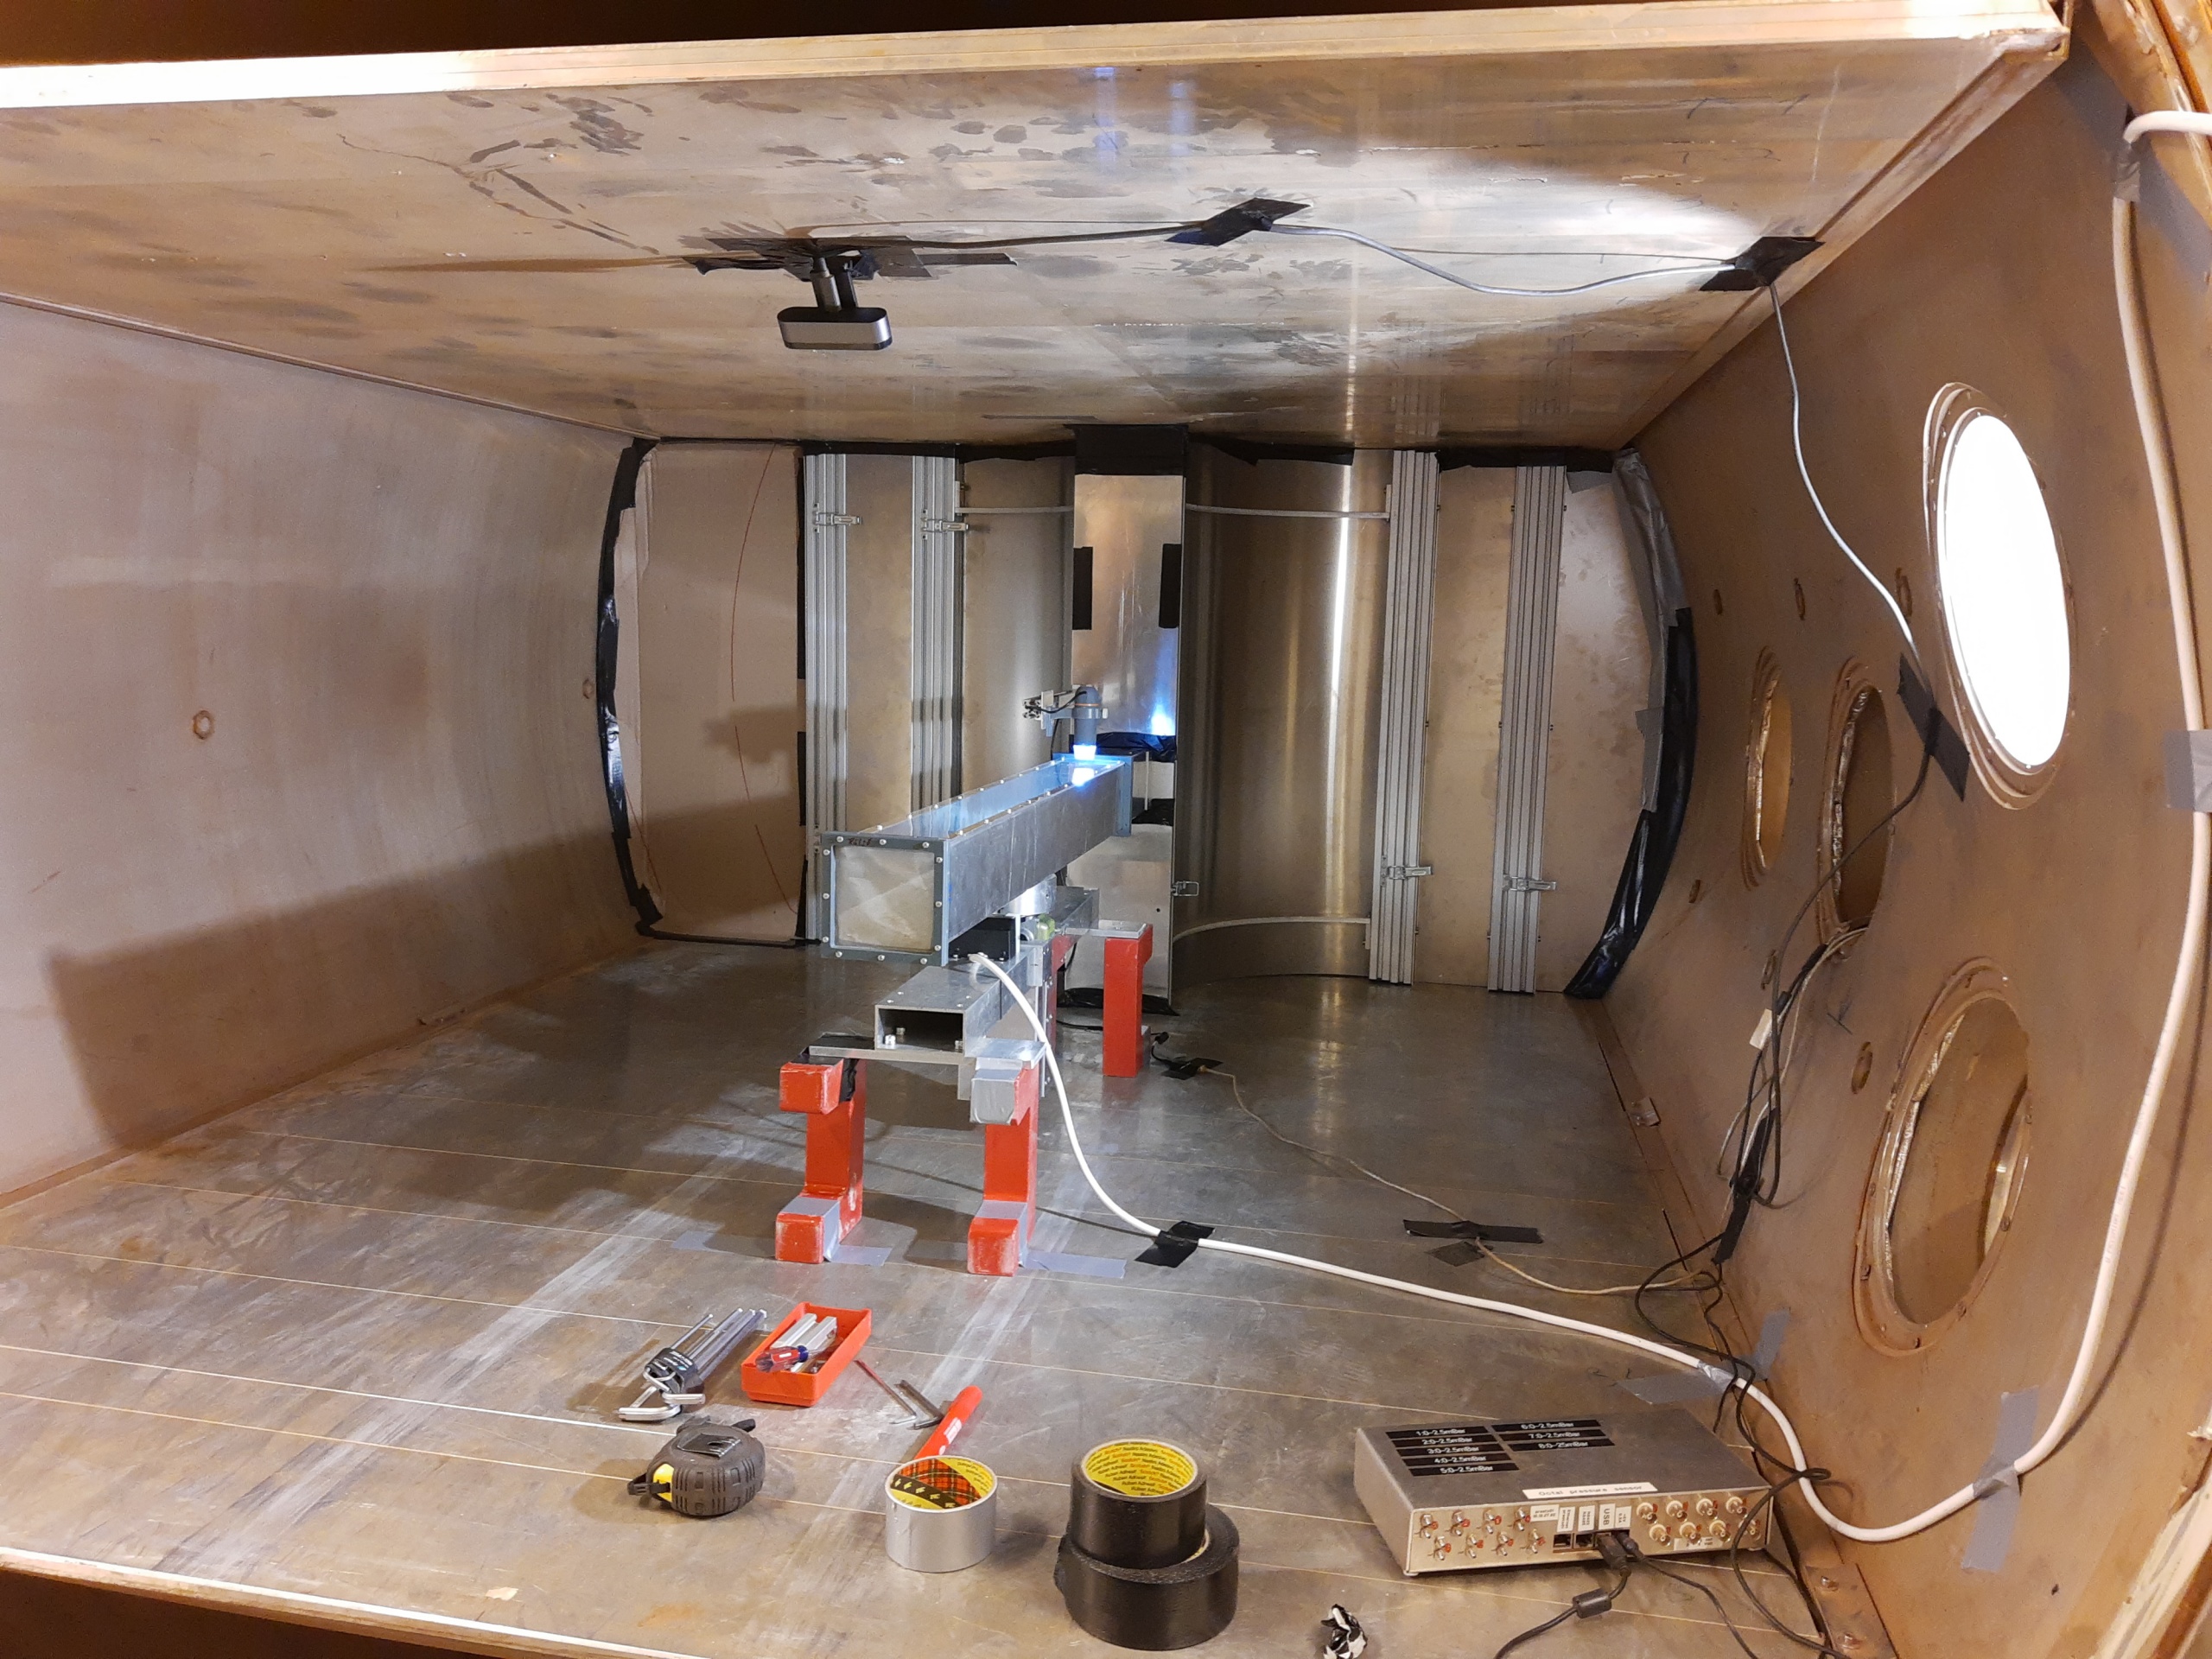 Self- built box in the wind tunnel at the beginning of the experiment. 20-EPN-078_AU_Abrasion Experiment. Credit: J.Merrison, Z.Kapui